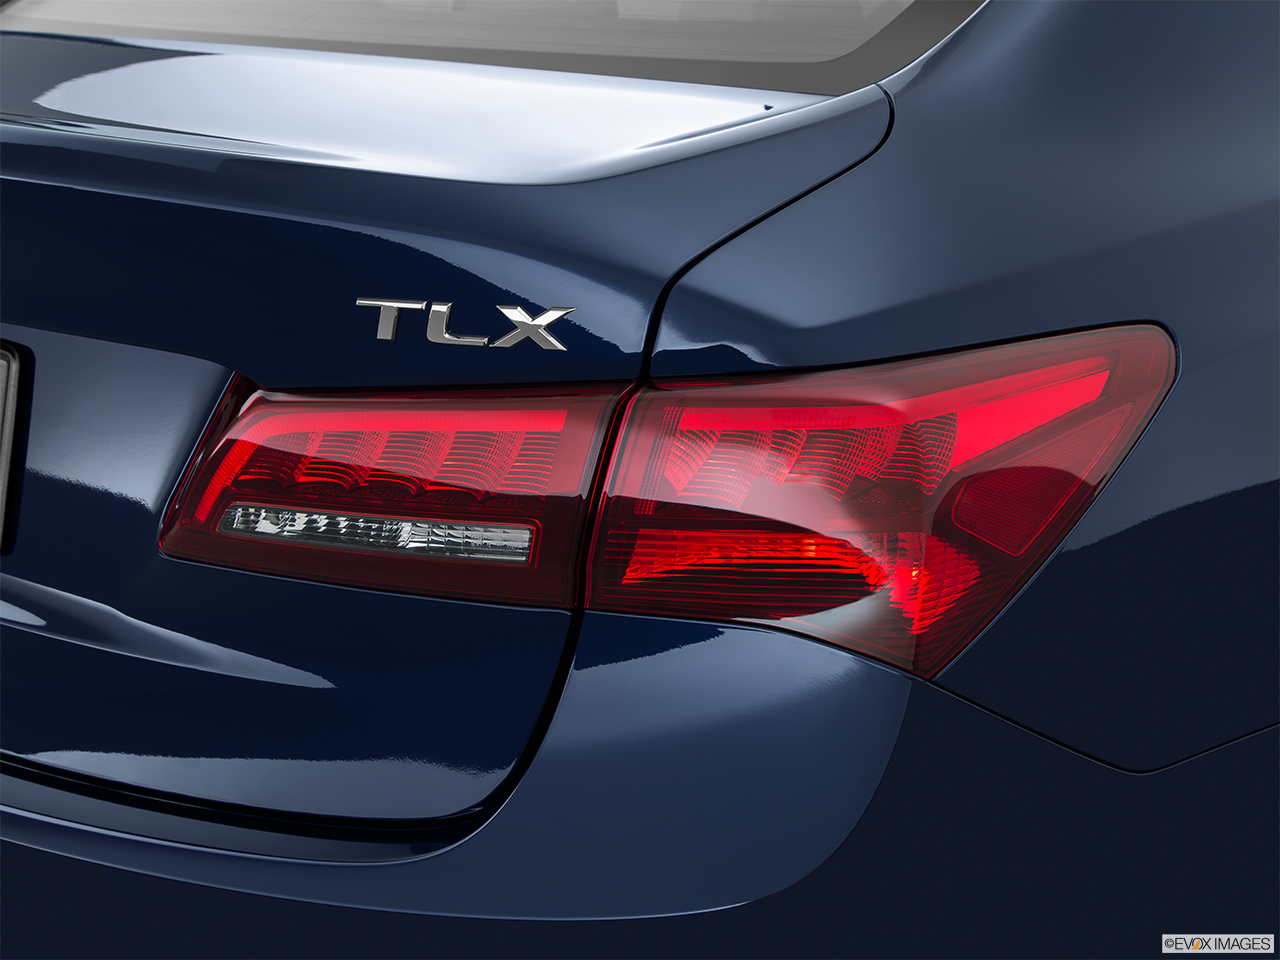 2015 Acura TLX 3.5 V-6 9-AT P-AWS Passenger Side Taillight. 